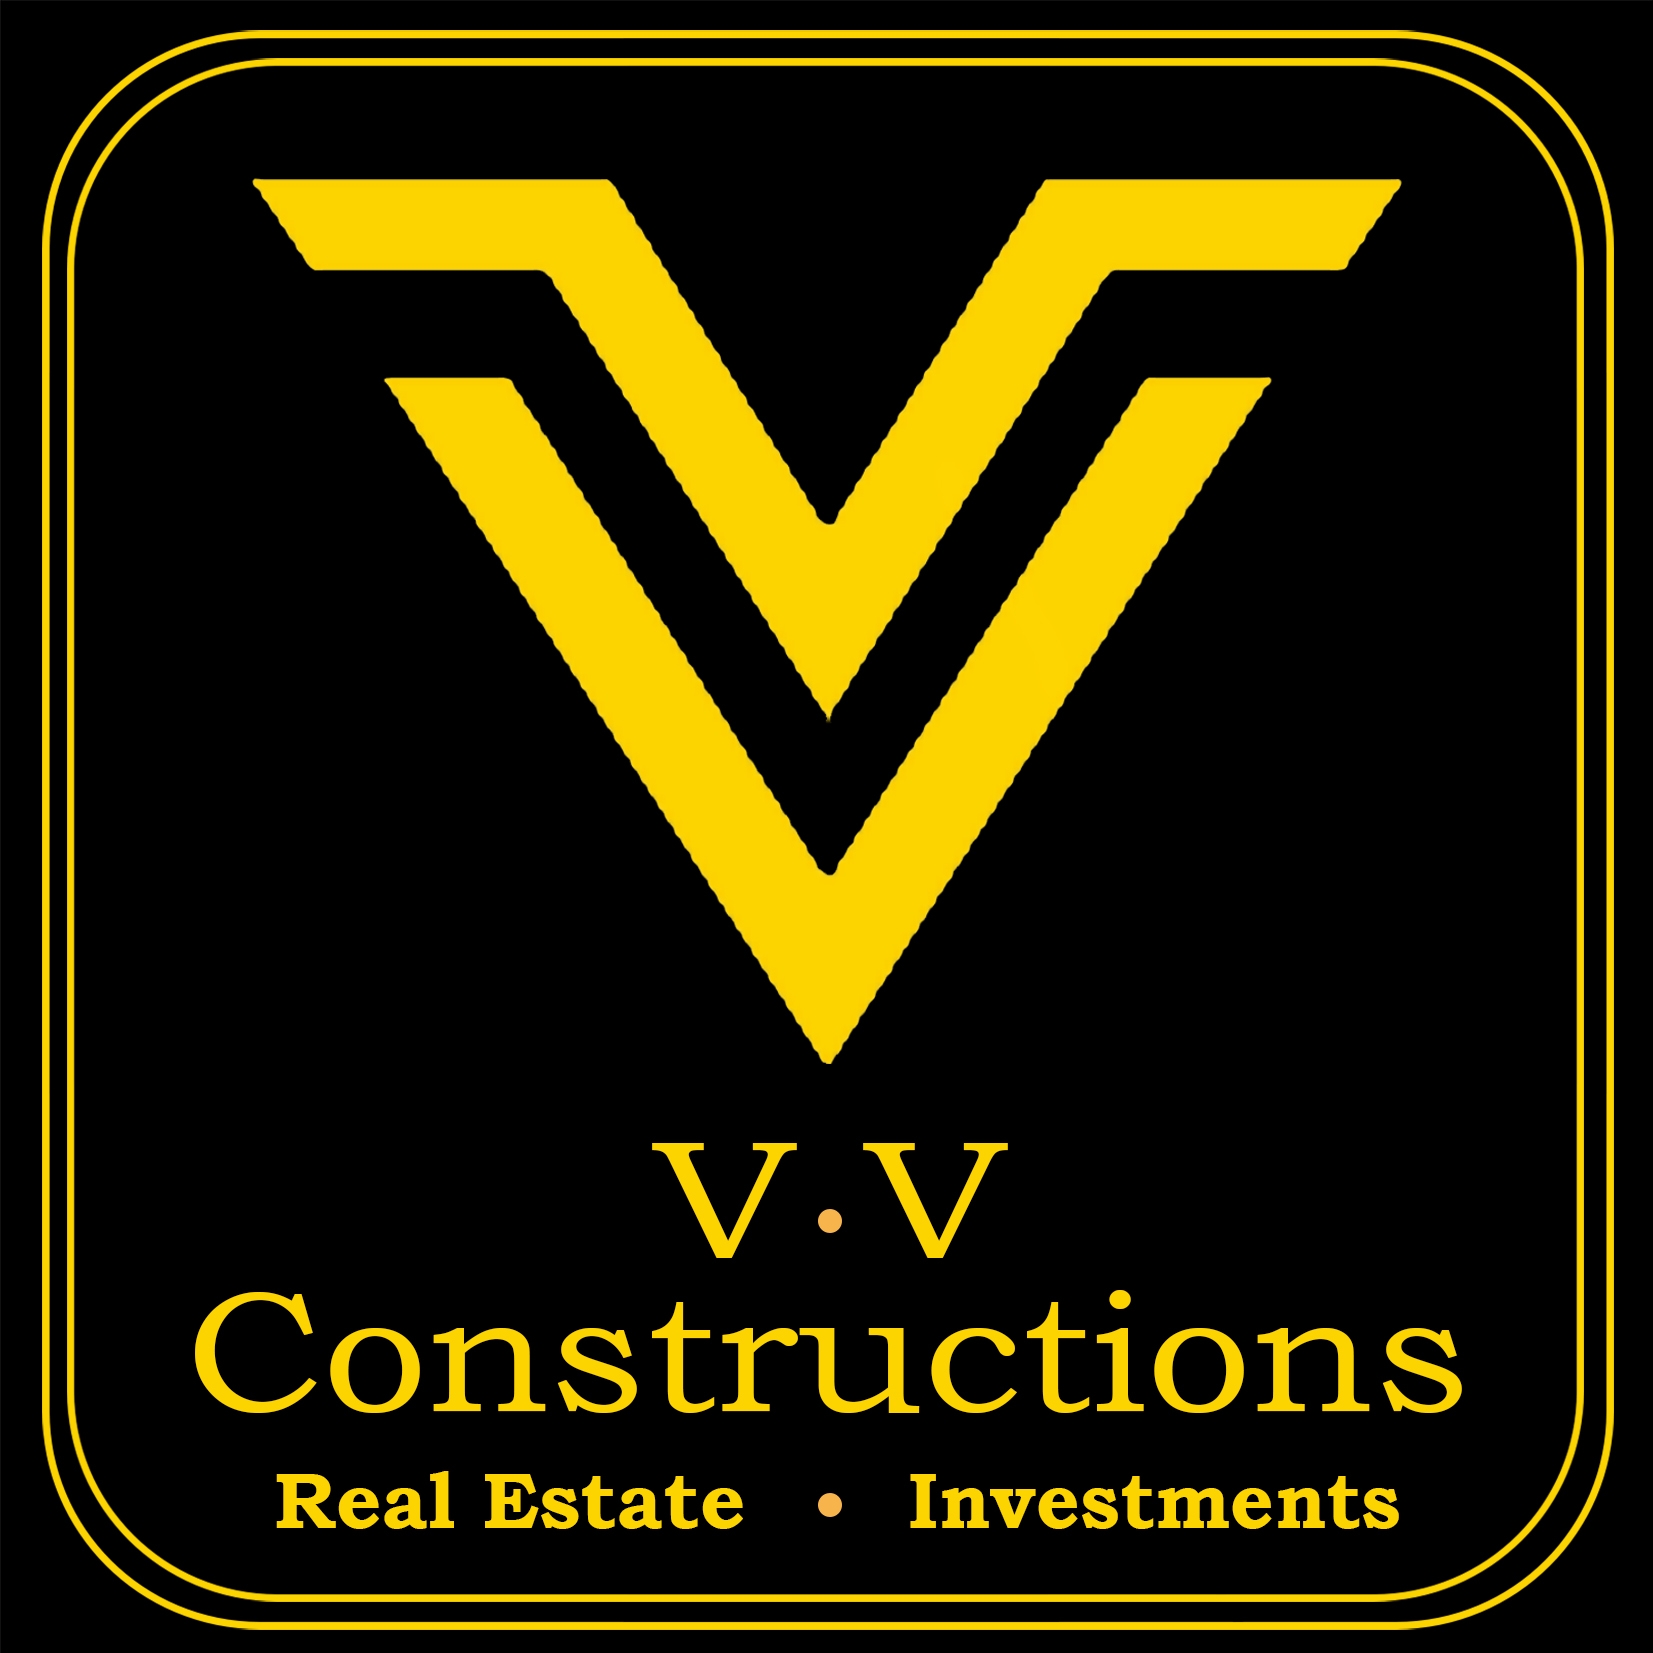 VV Constructions & Developers|Legal Services|Professional Services